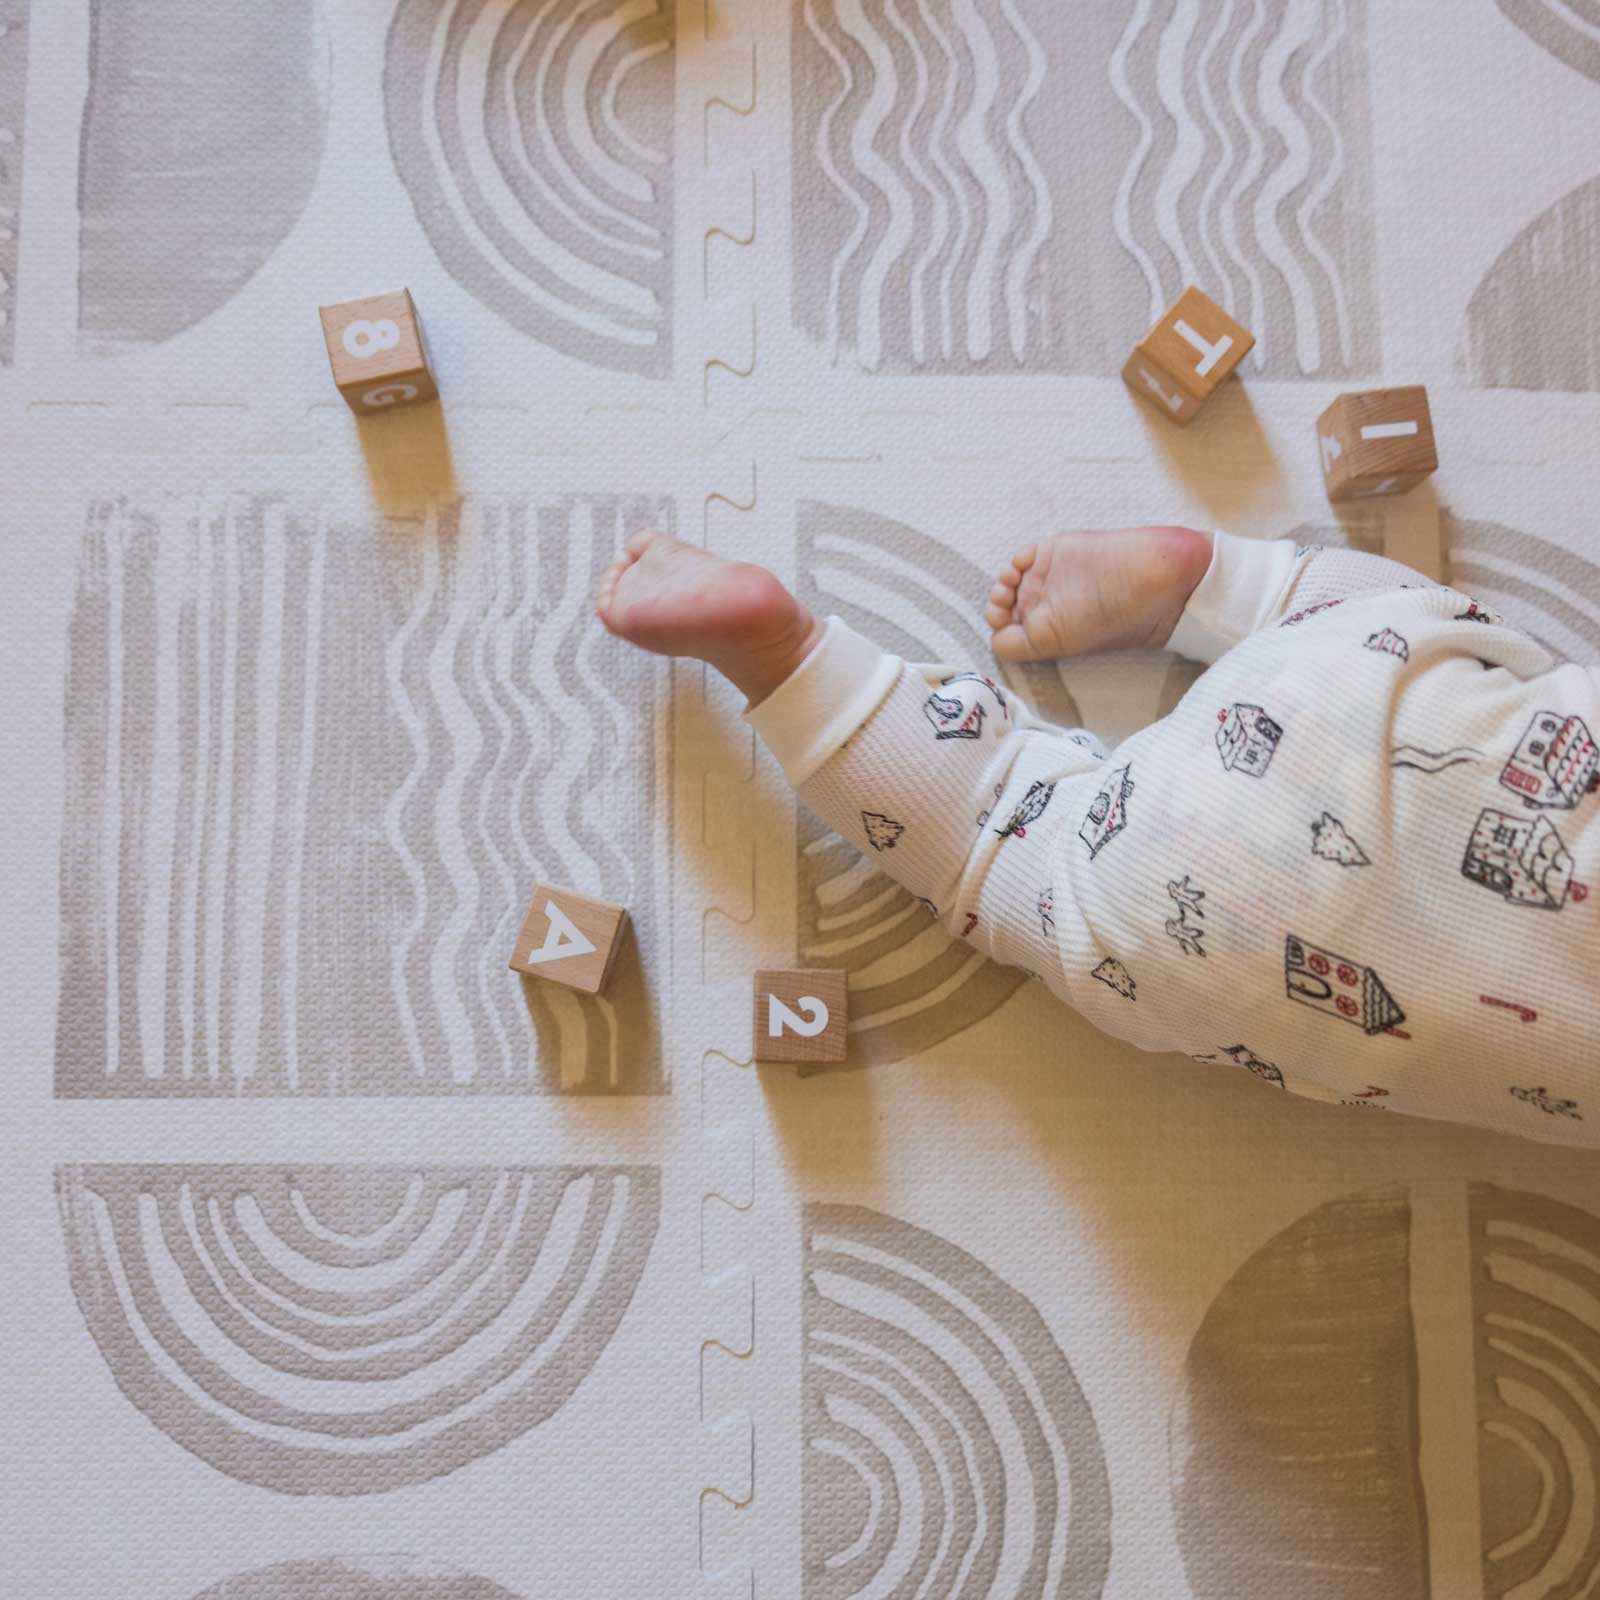 Ada pebble neutral geometric print play mat with wooden blocks and baby wearing christmas pajamas crawling out of the shot